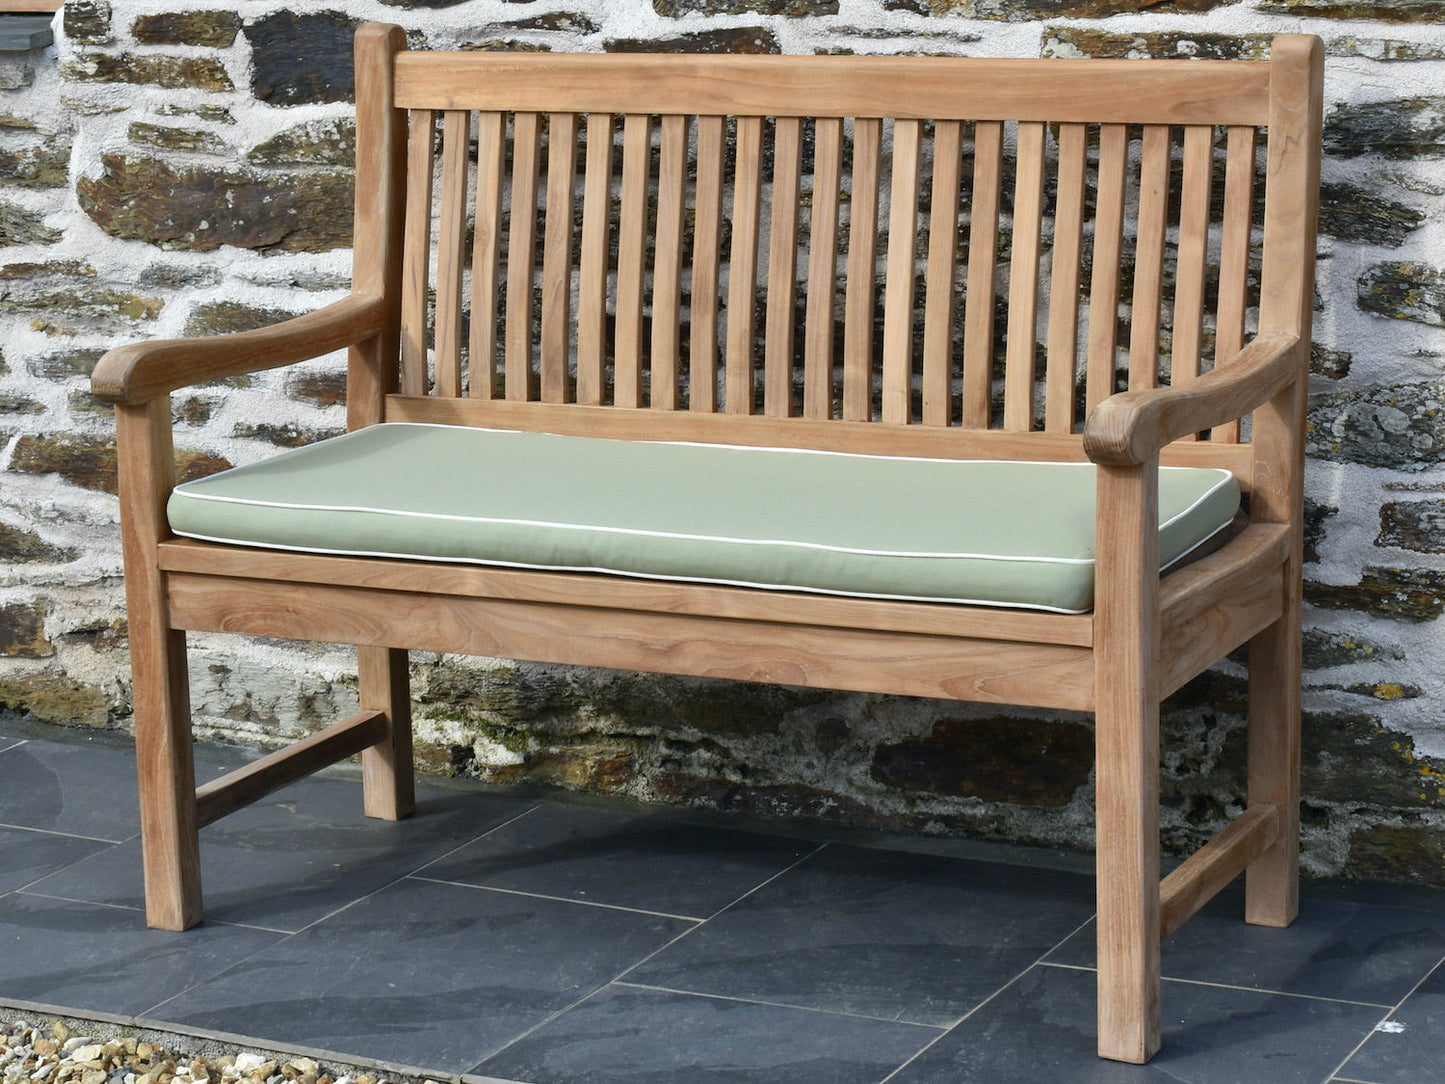 Luxury light olive green 2 seater / 120cm outdoor garden bench cushion with contrast white piping